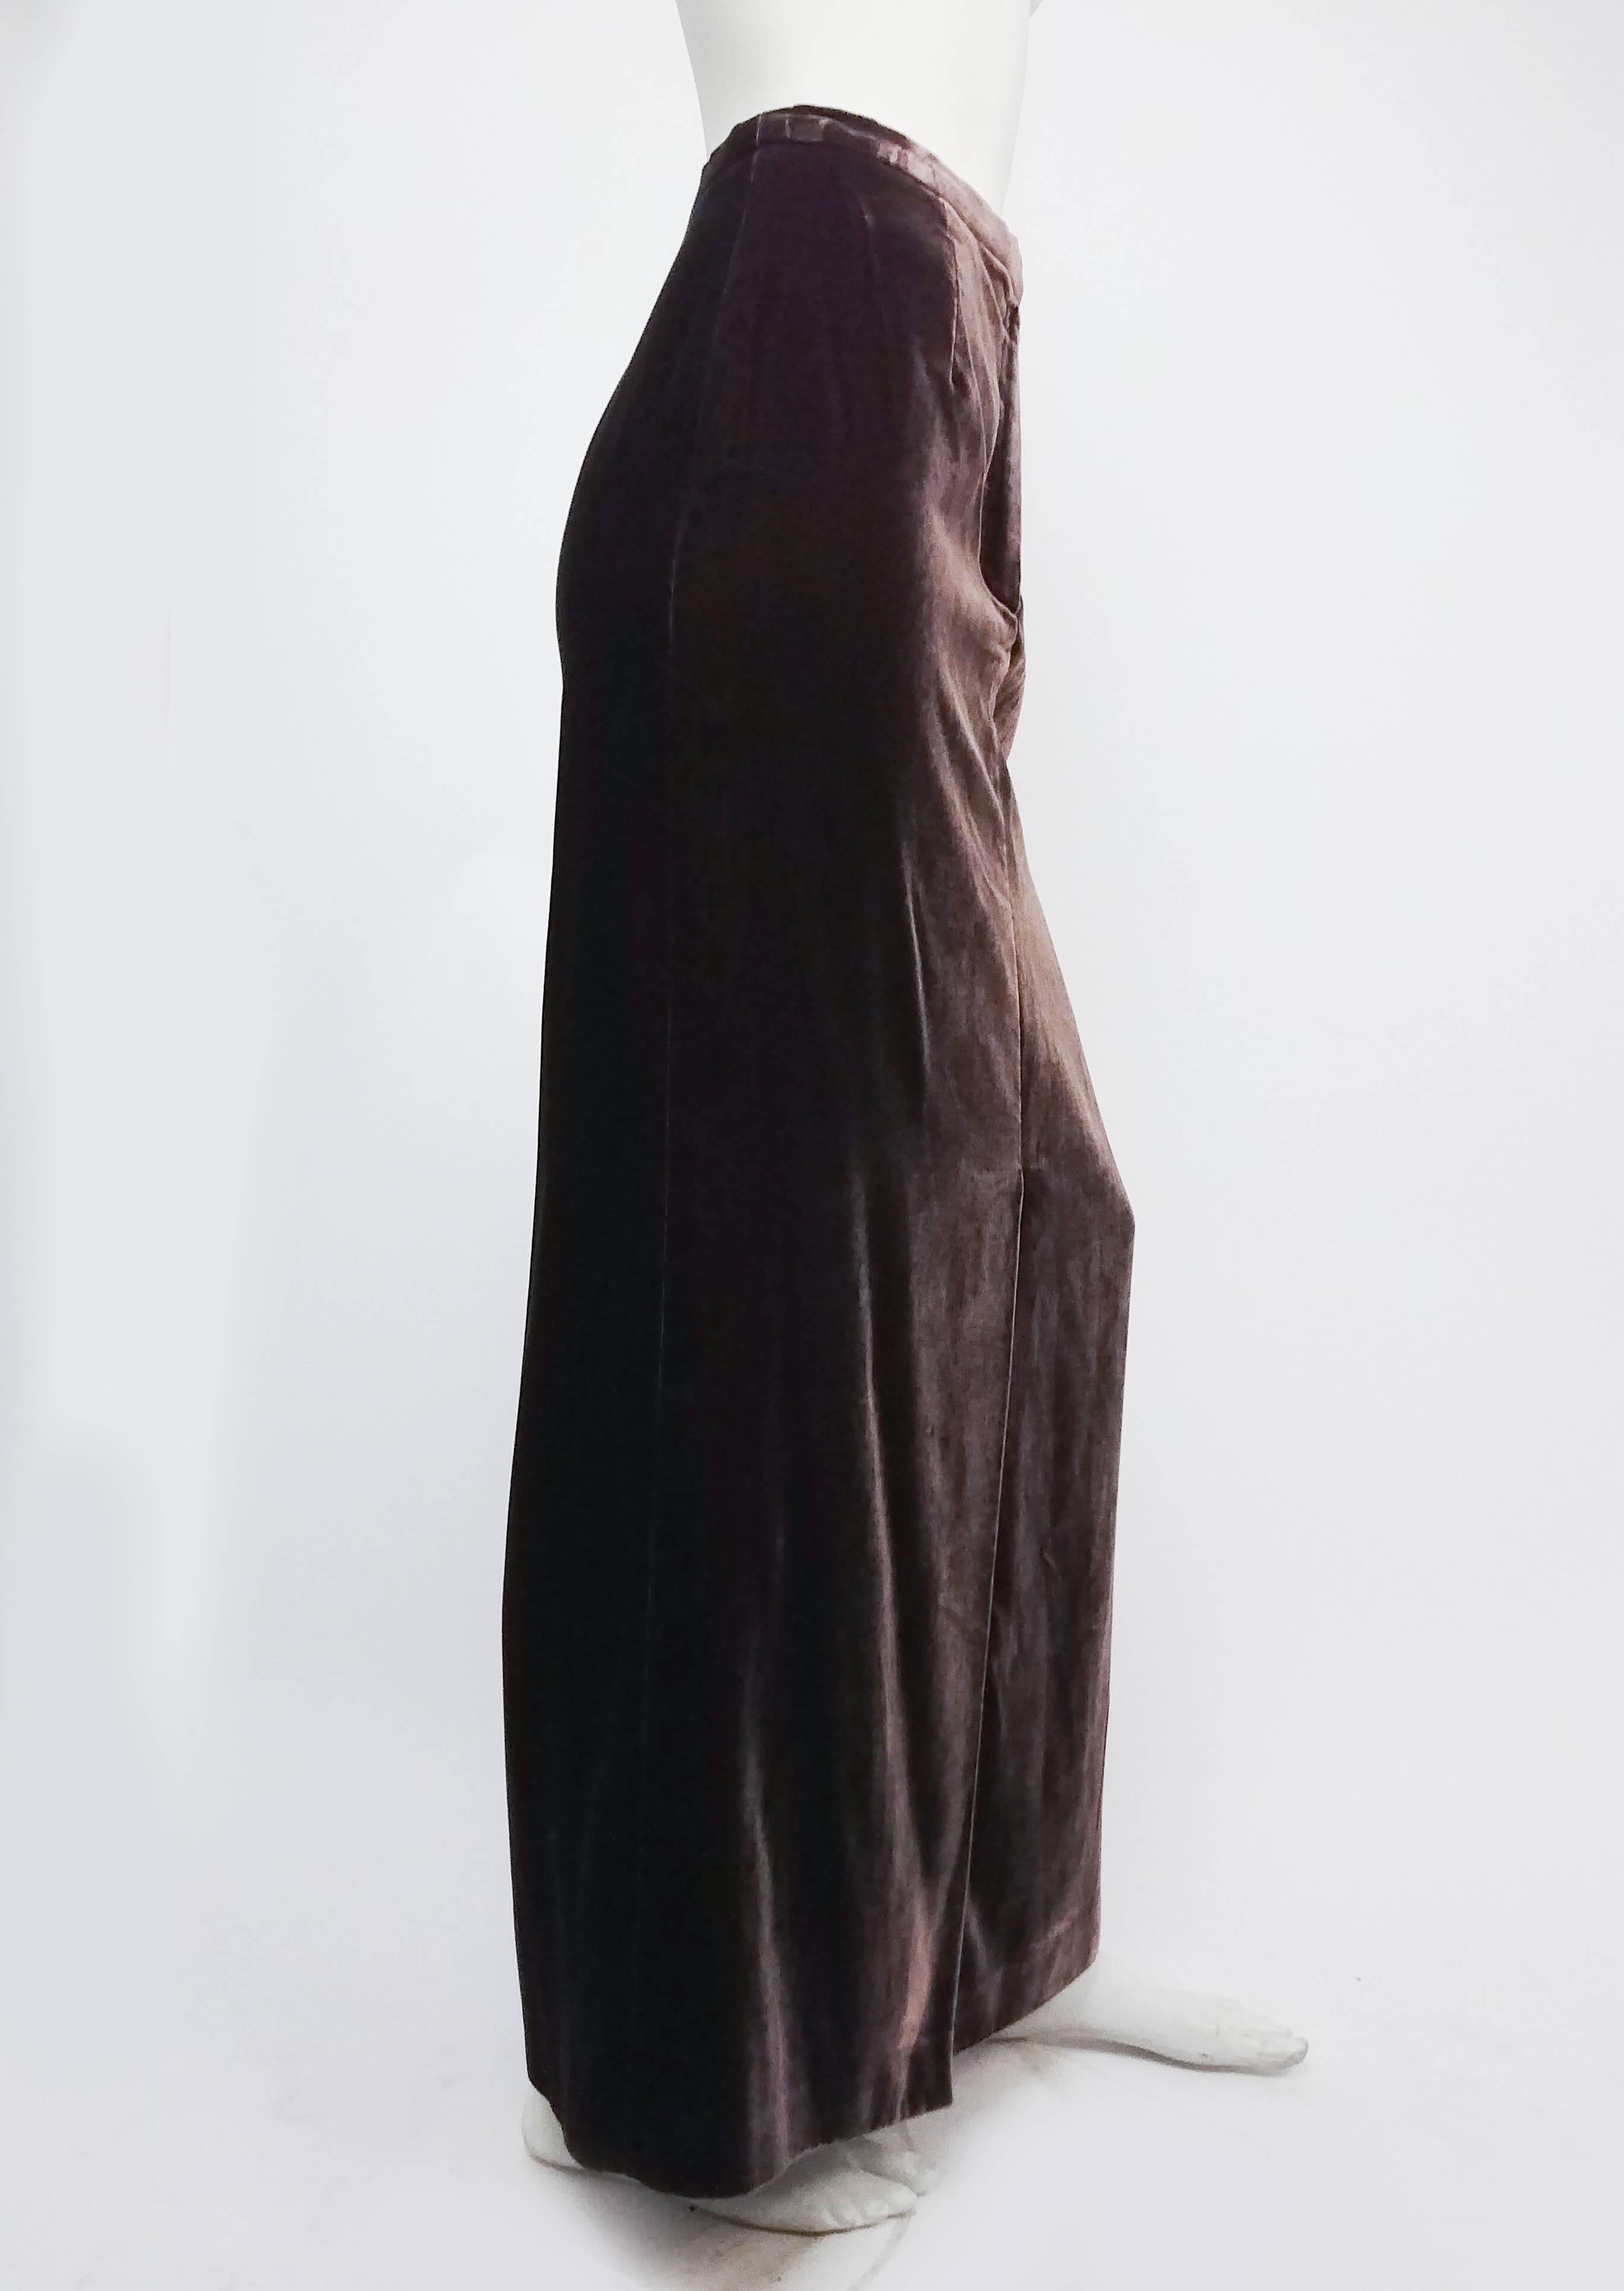 1990s Georgia Armani Taupe Brown Velvet Maxi Skirt. Front j-stitch zip, buttons at side waist. Front slit for ease of walking. 